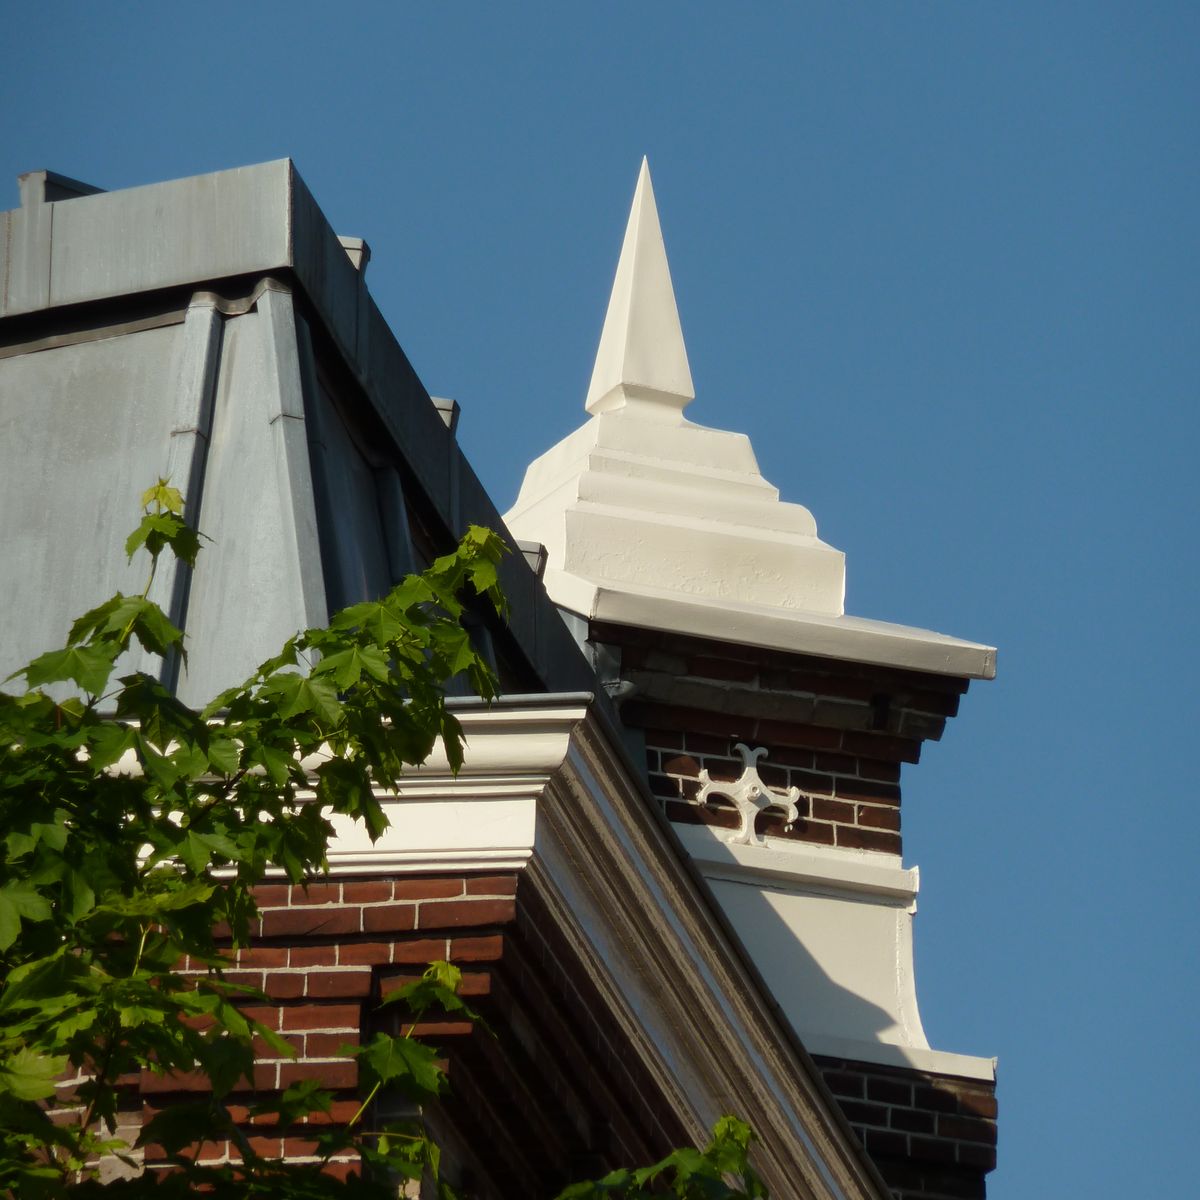 the roof and chimney of a brick building